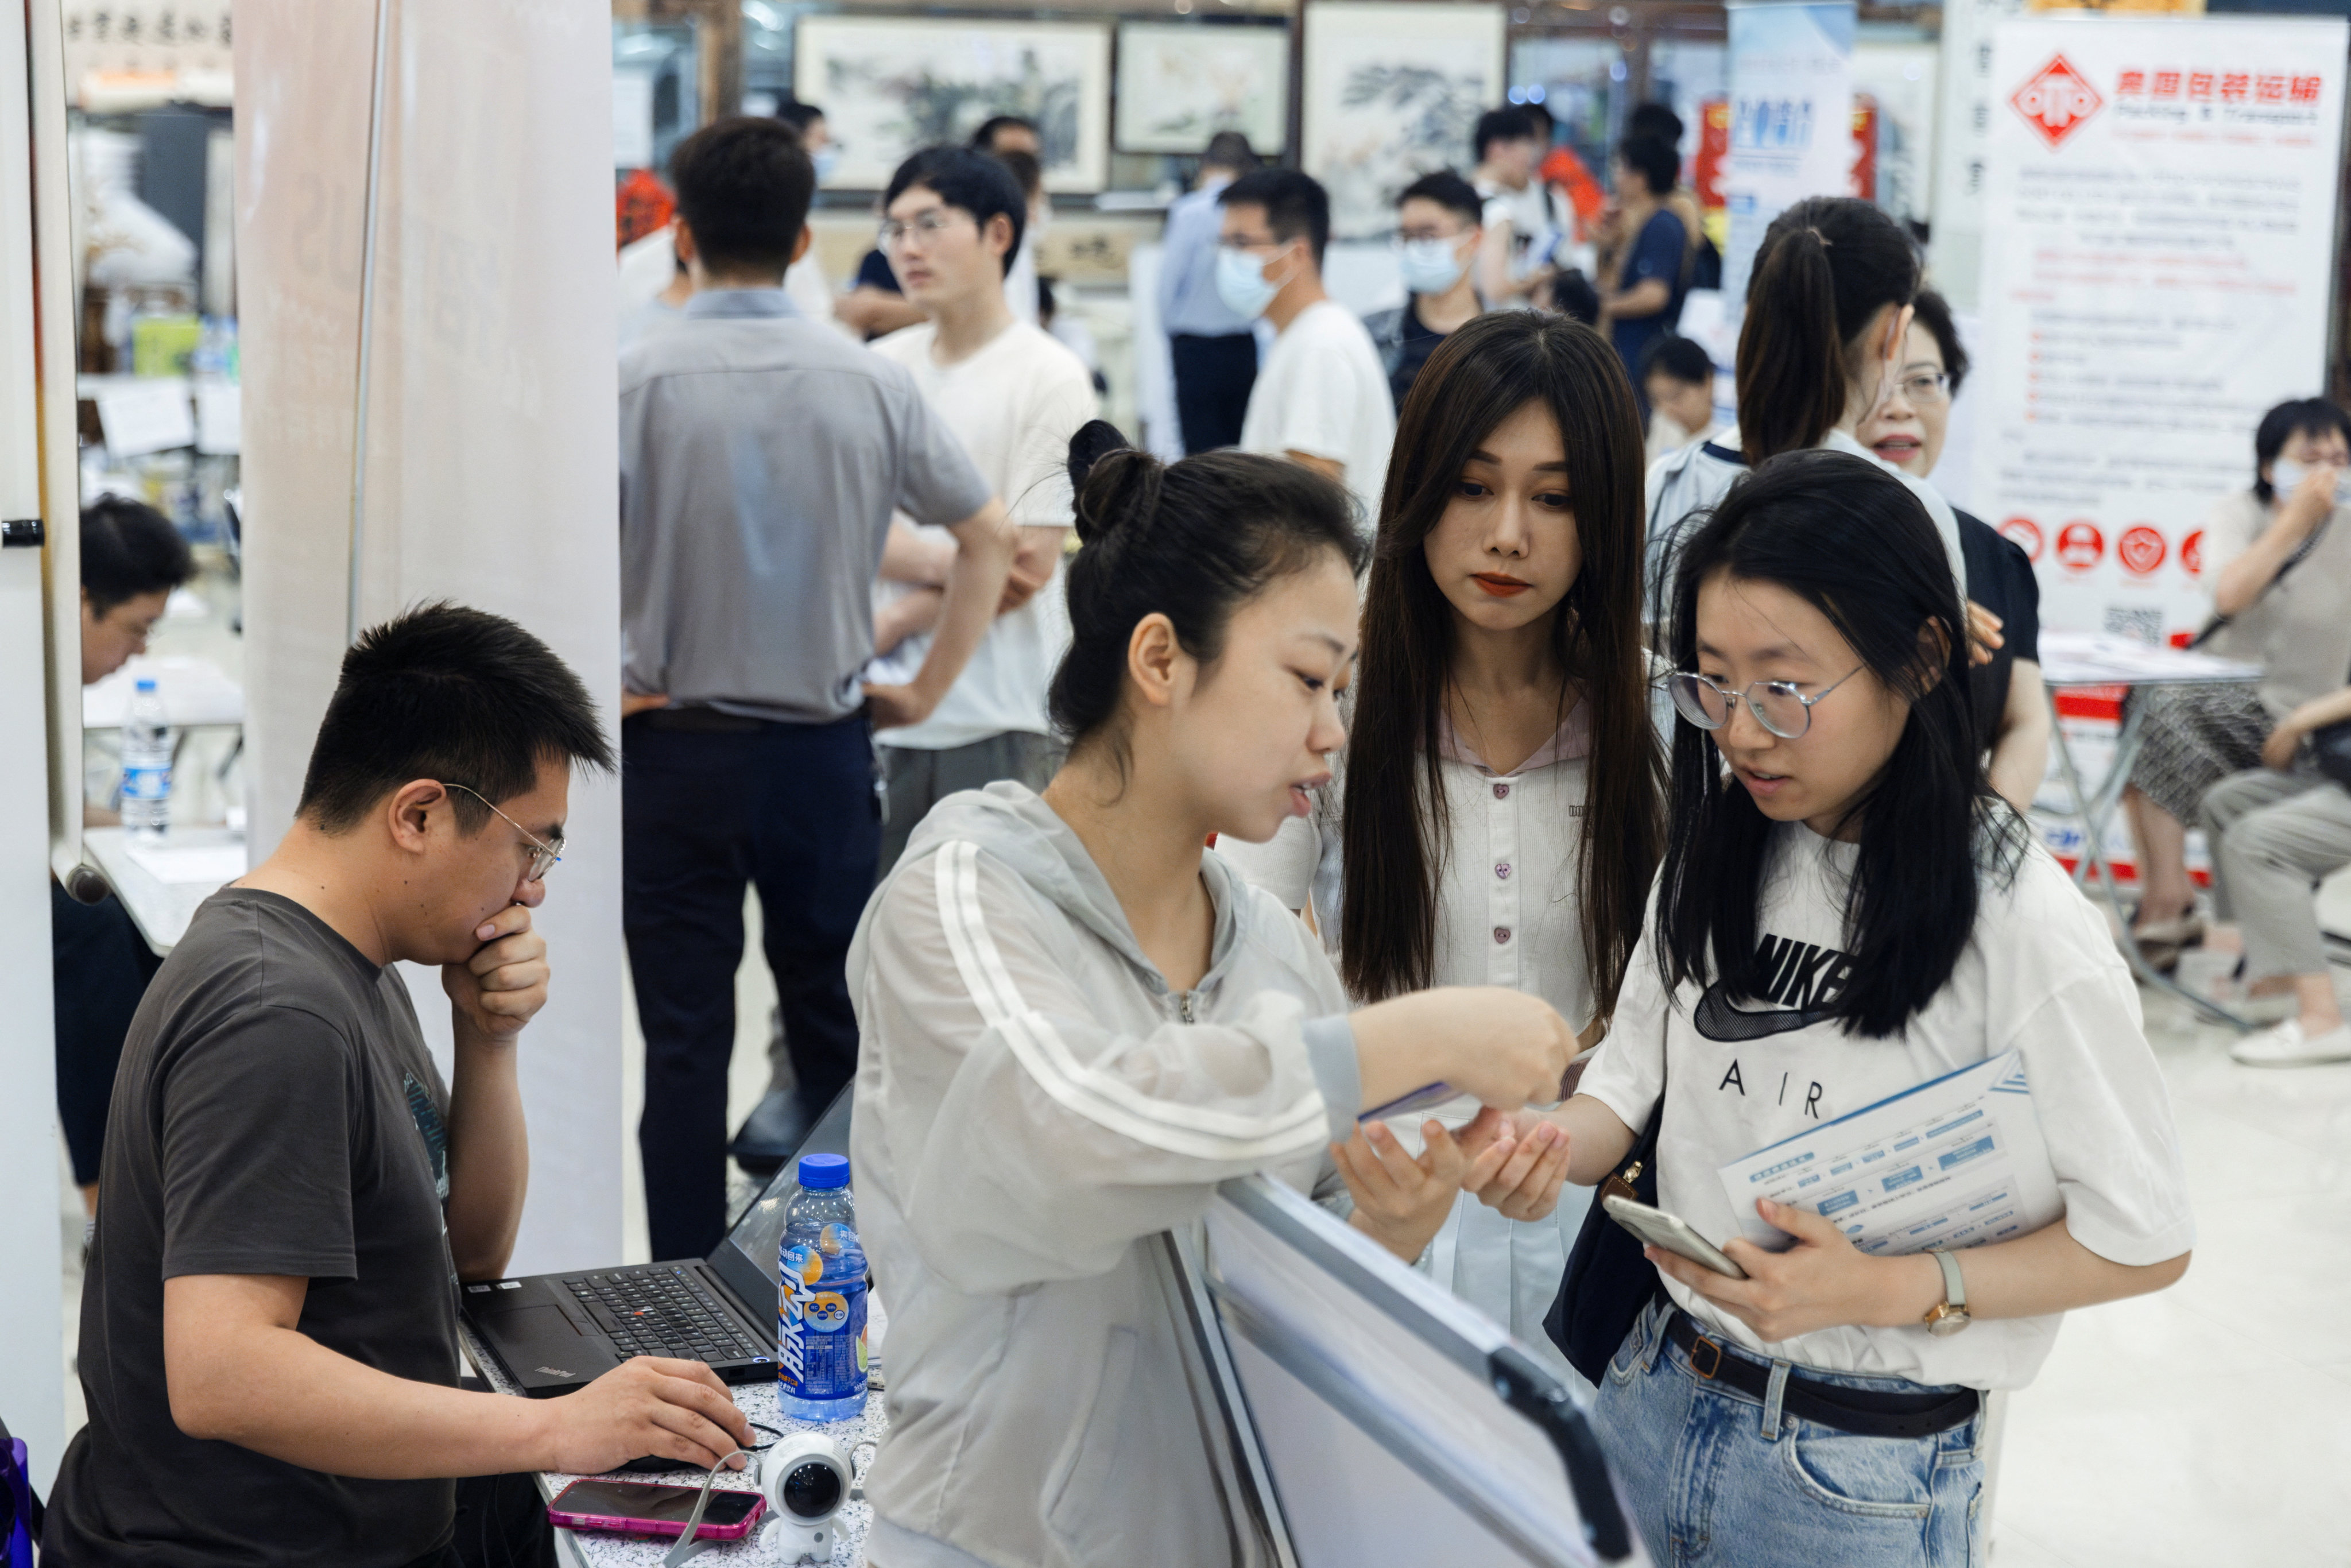 People attend a job fair in a mall in Beijing. Photo: Reuters